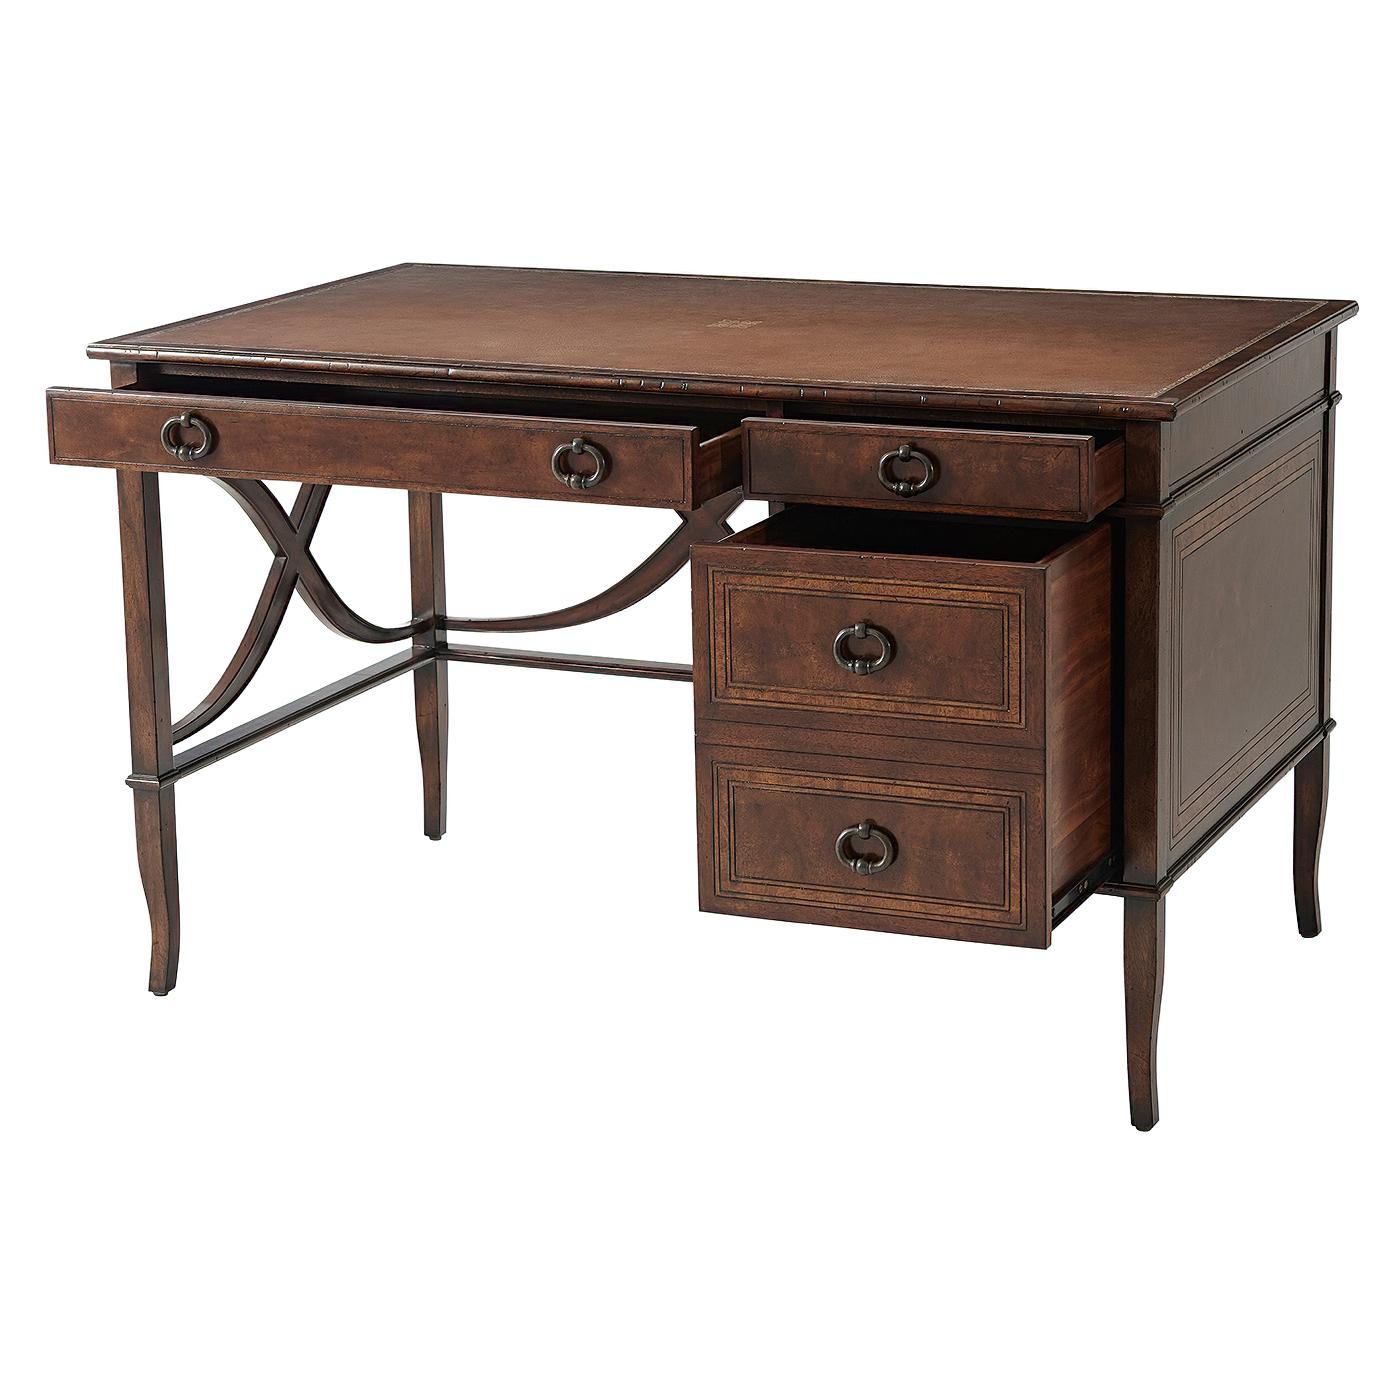 A French neoclassic style mahogany, cerejeira veneered and crossbanded writing desk, the rectangular burnished leather inlaid top above one long and one short frieze drawers, and an additional deep drawer below, the sides with wavy 'X' stretchers